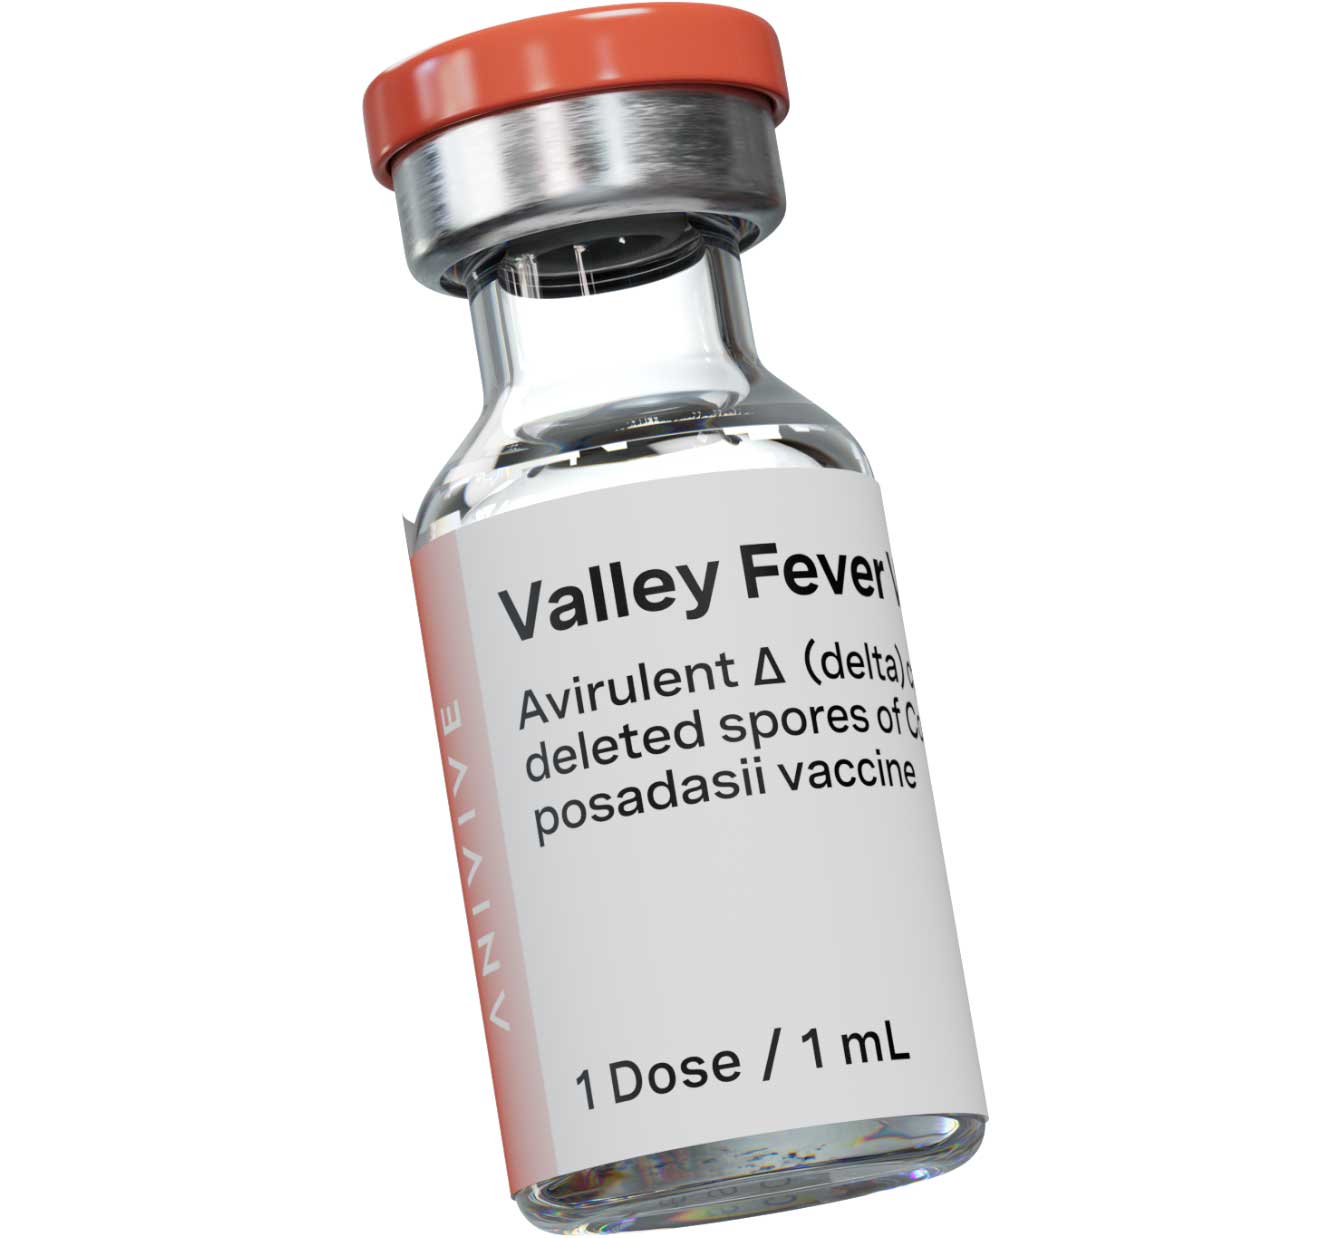 A Proposed Single Dose Vial of the Valley Fever Vaccine. Graphic by Anivive Lifesciences, Inc.